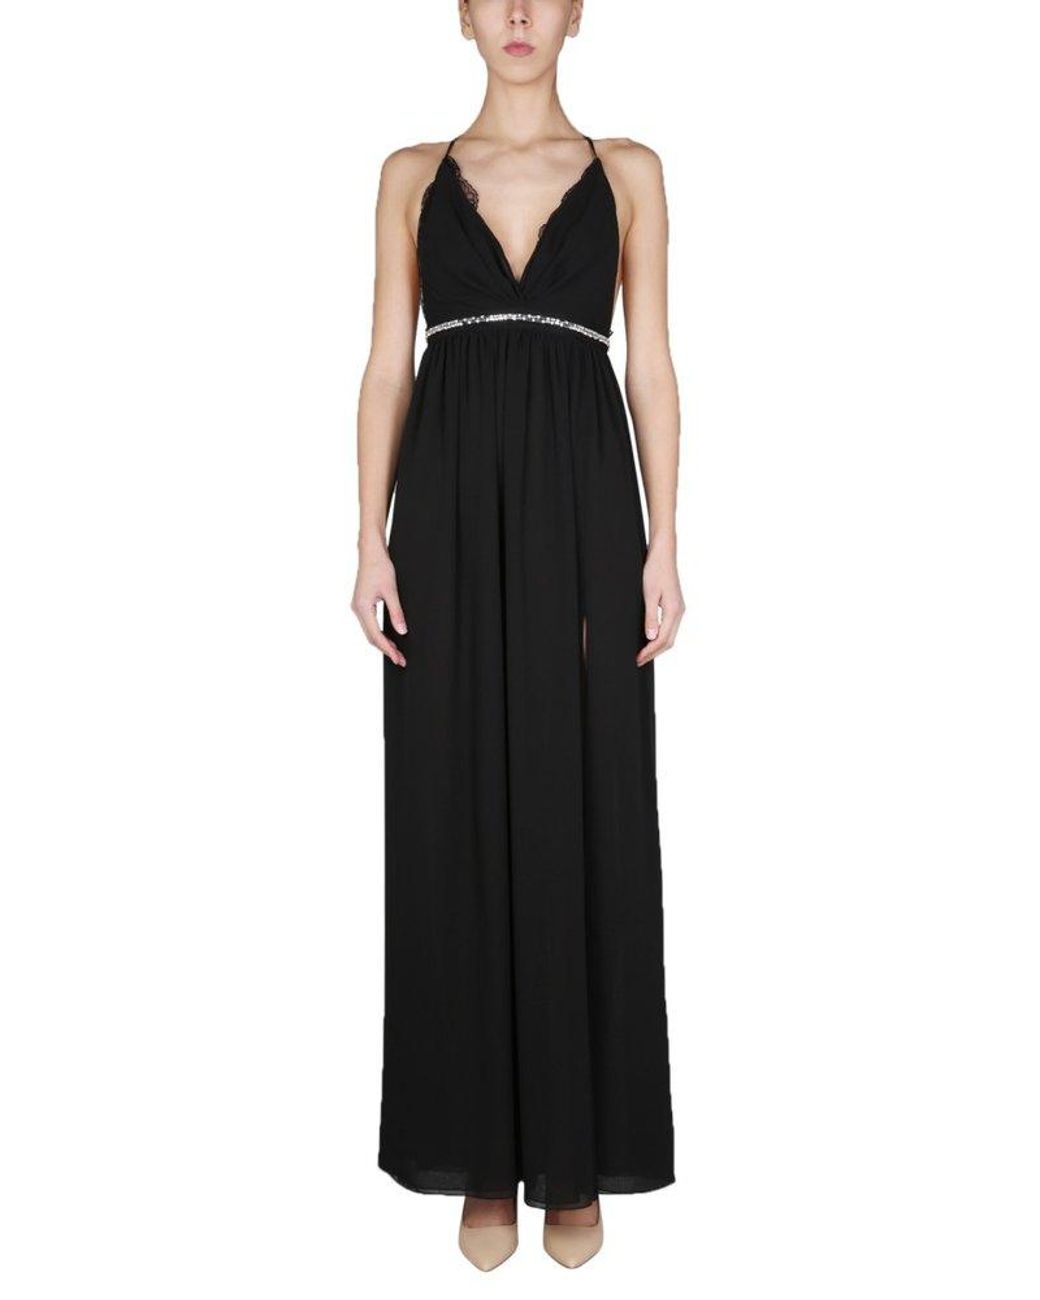 Anna Molinari Embellished Lace-detailed Maxi Dress in Black | Lyst